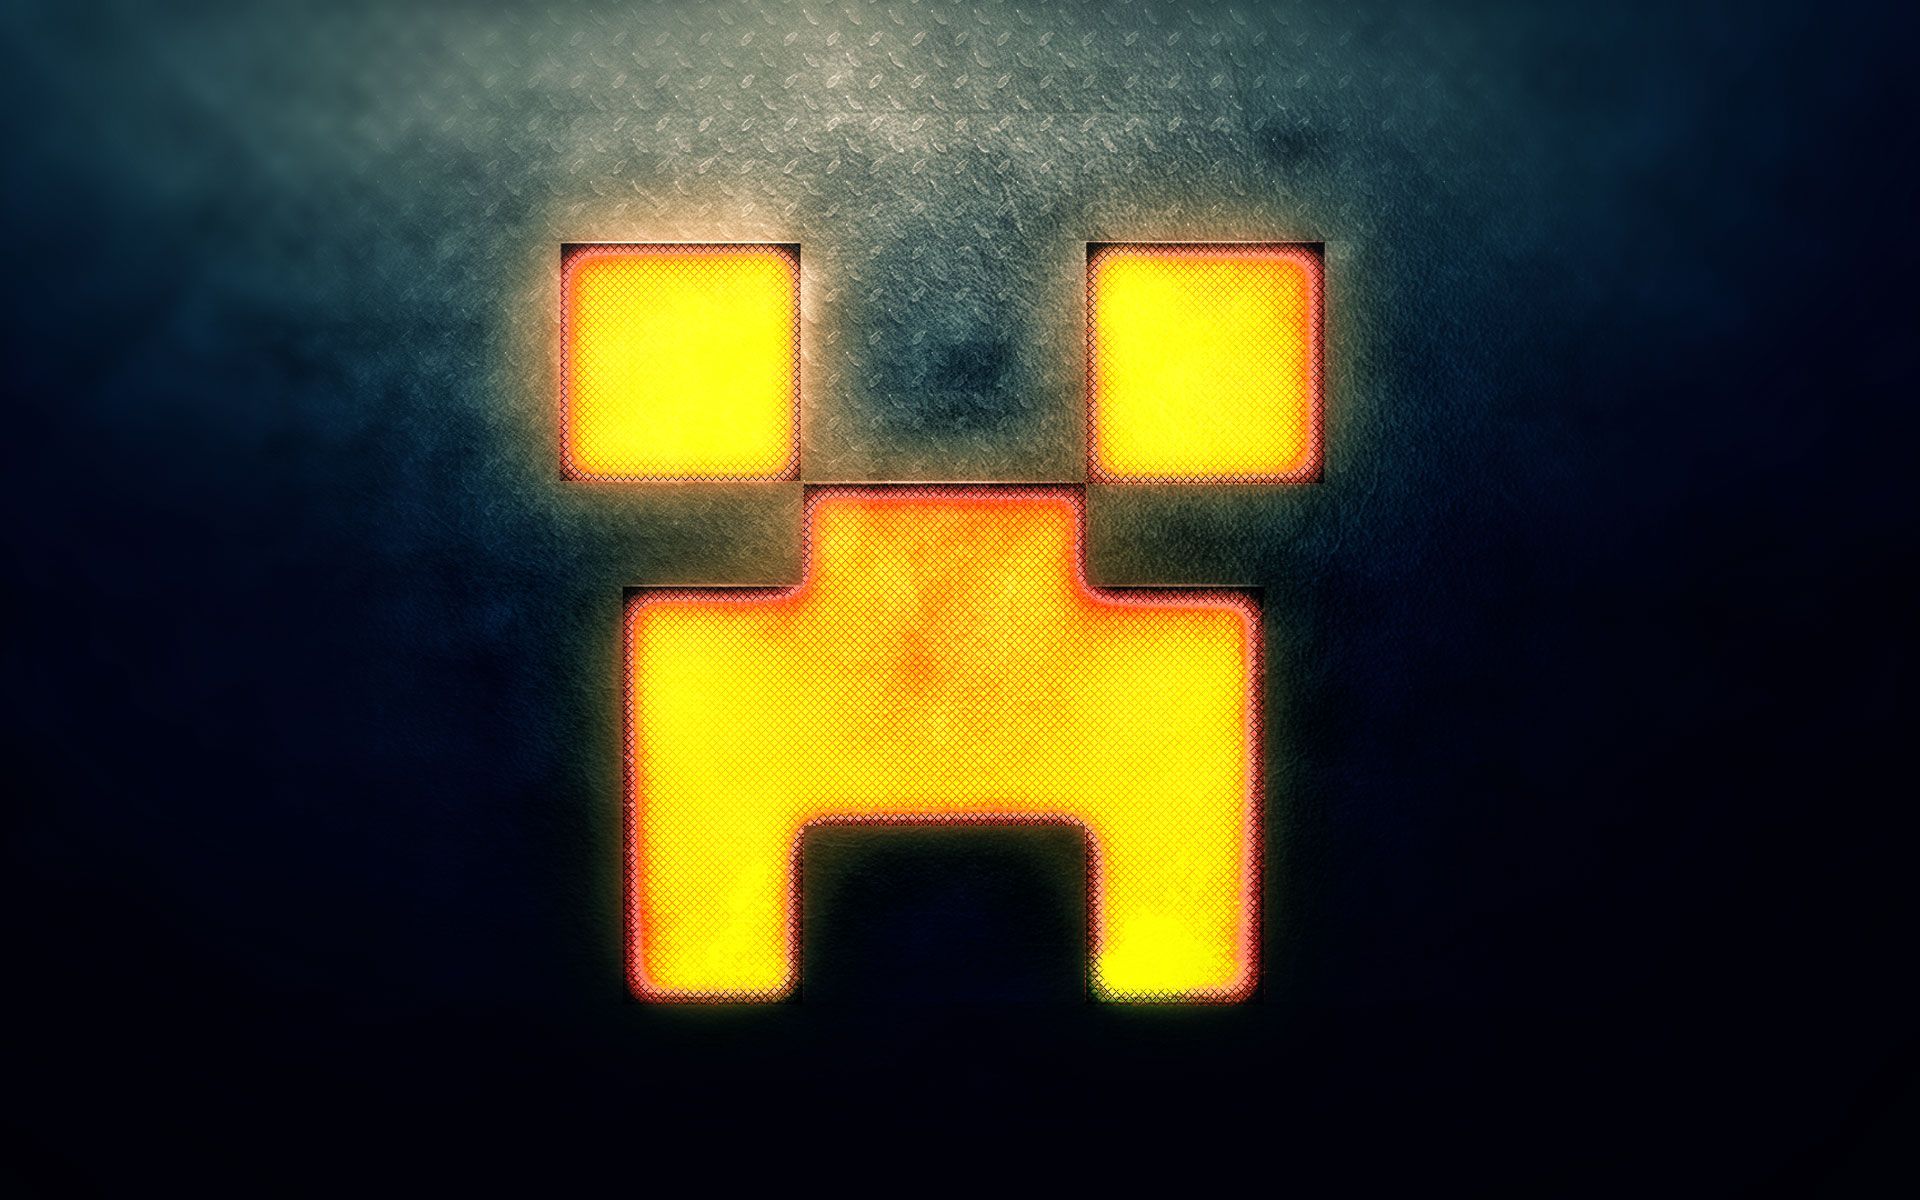 What is the title of this picture ? Creeper Wallpaper 1080p - WallpaperSafari